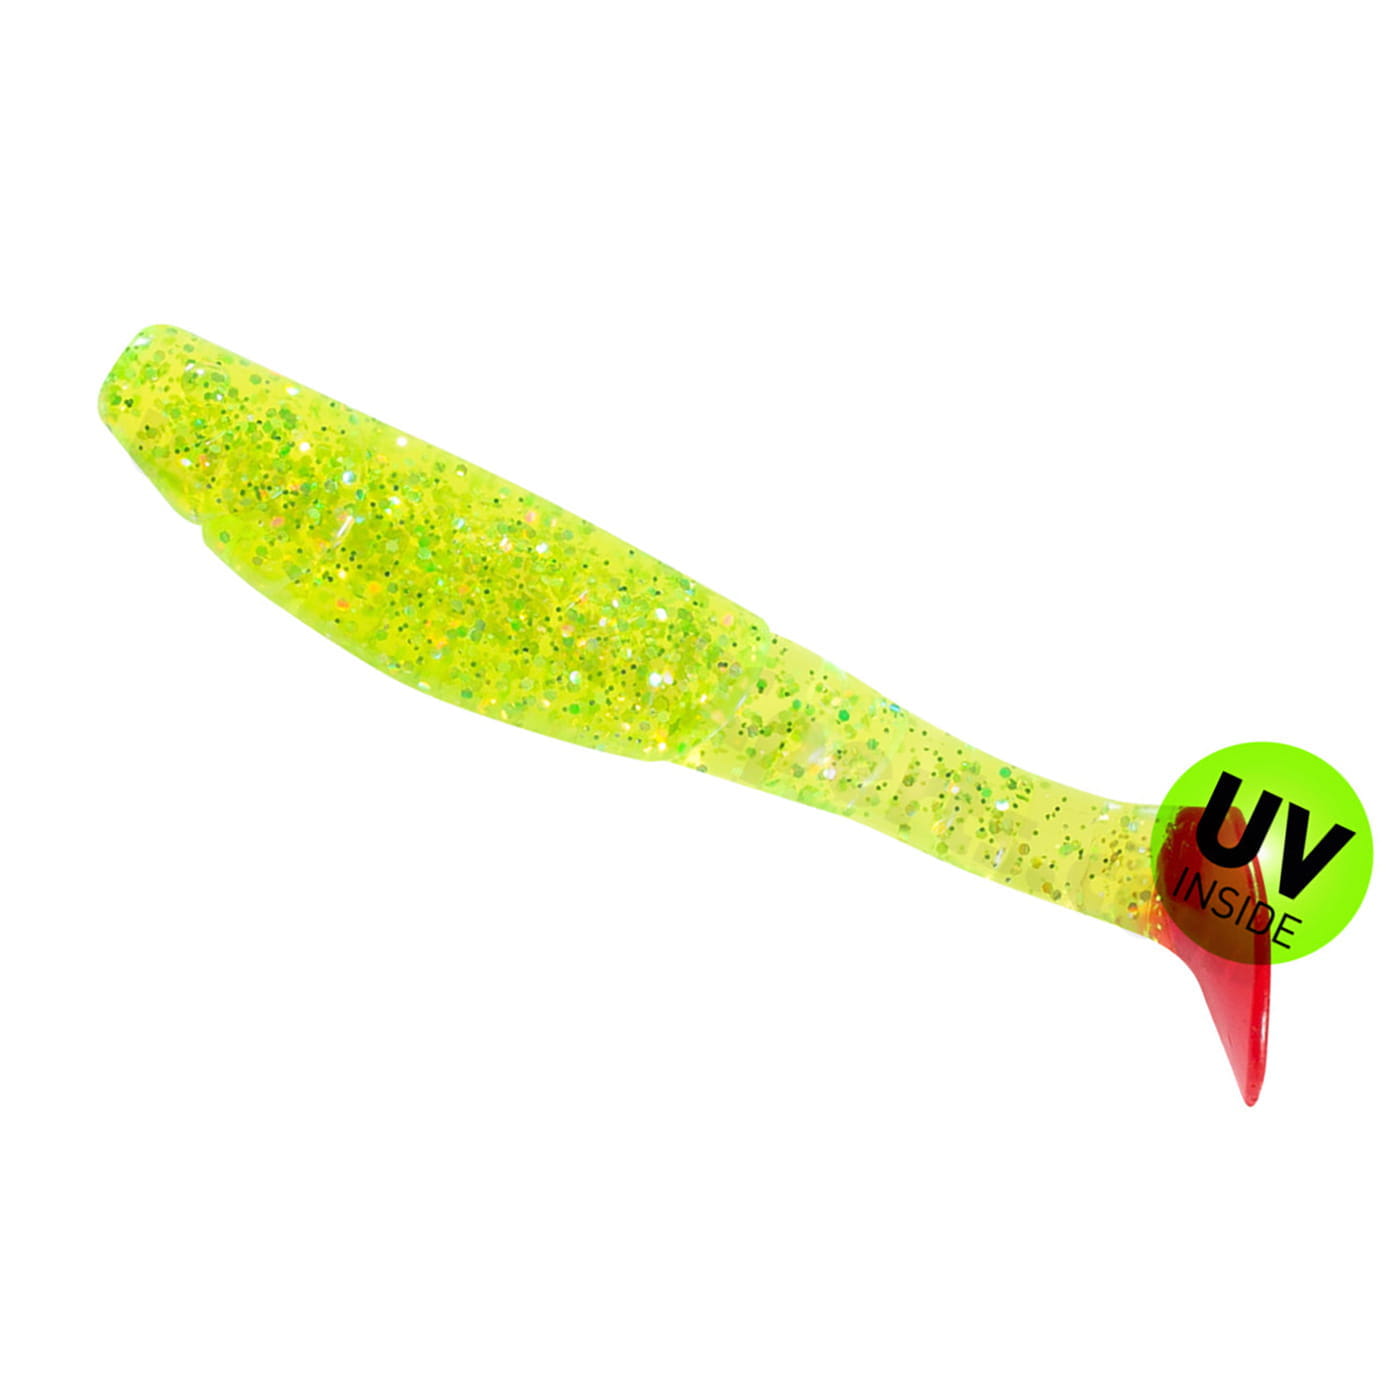 Kopyto Classic - chartreuse-Glitter / red tail